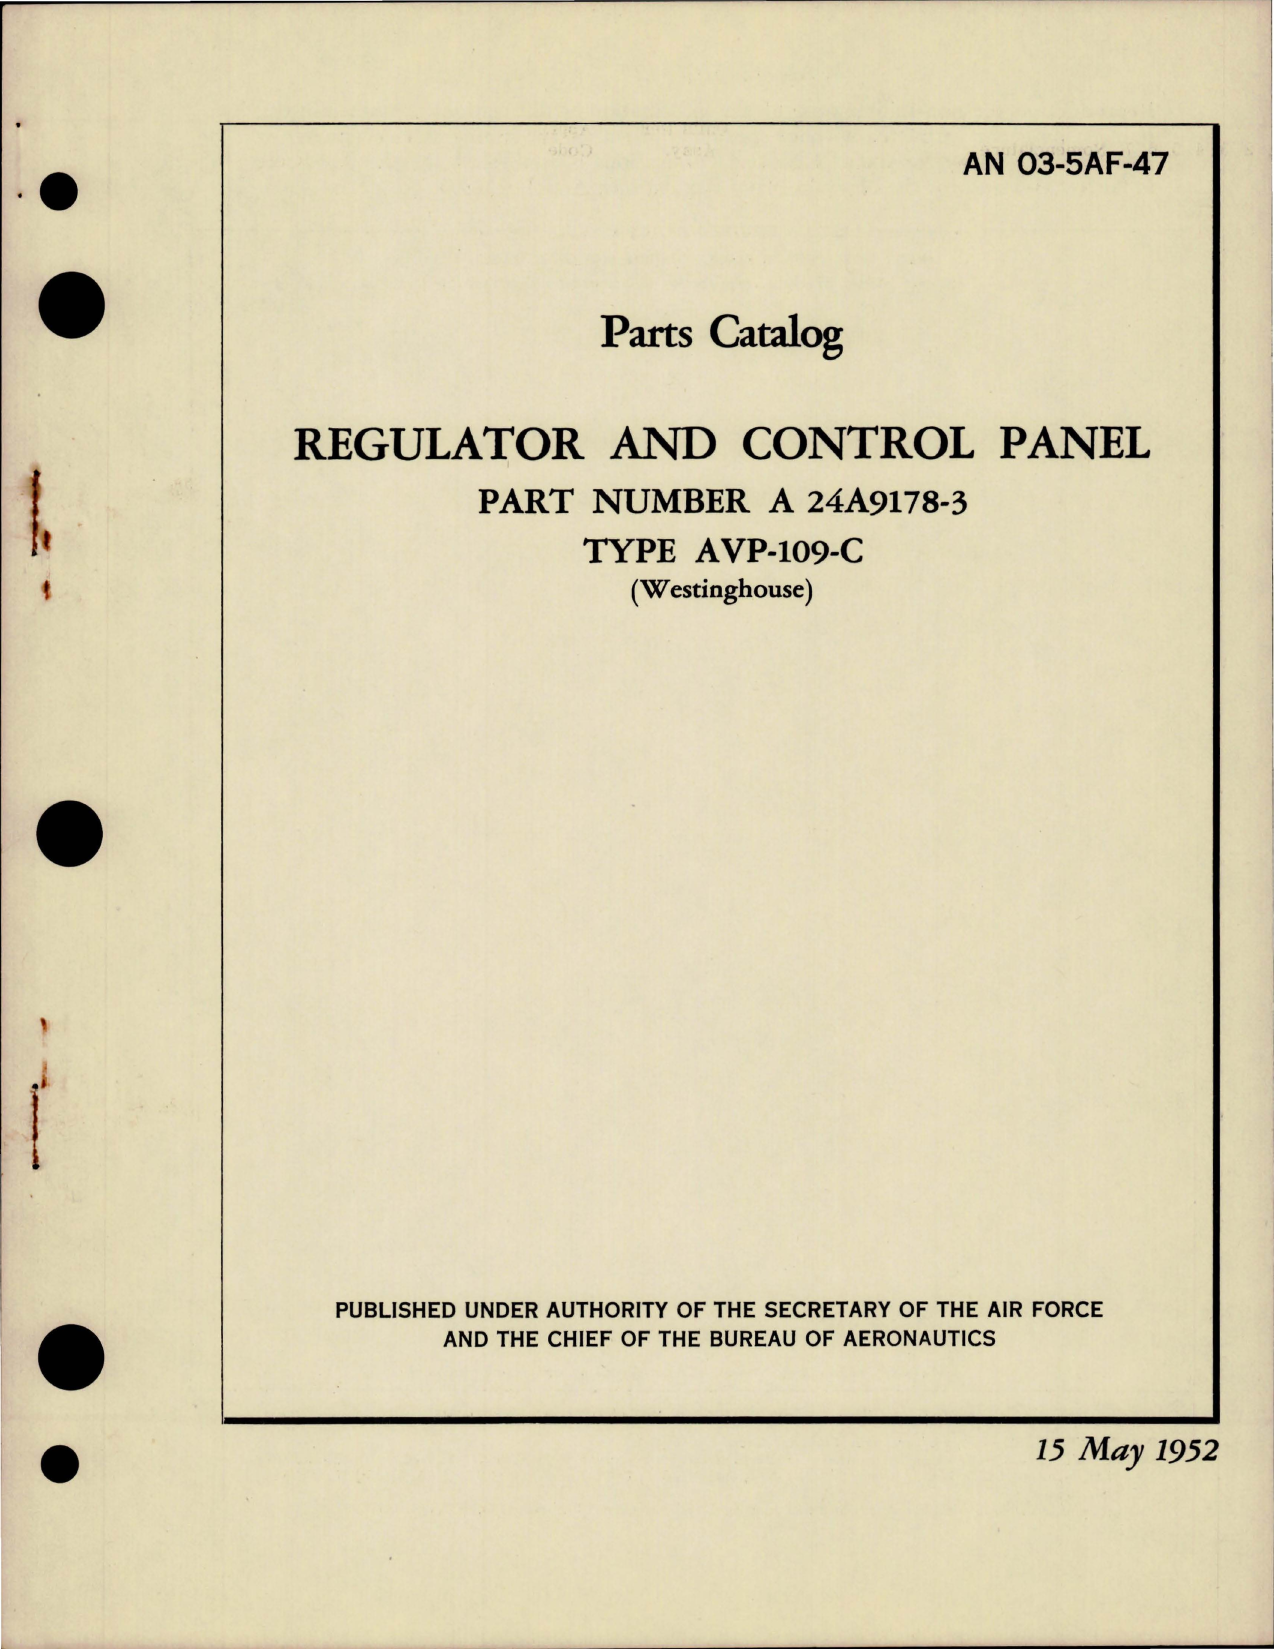 Sample page 1 from AirCorps Library document: Parts Catalog for Regulator and Control Panel - Part A 24A9178-3 - Type AVP-109-C 